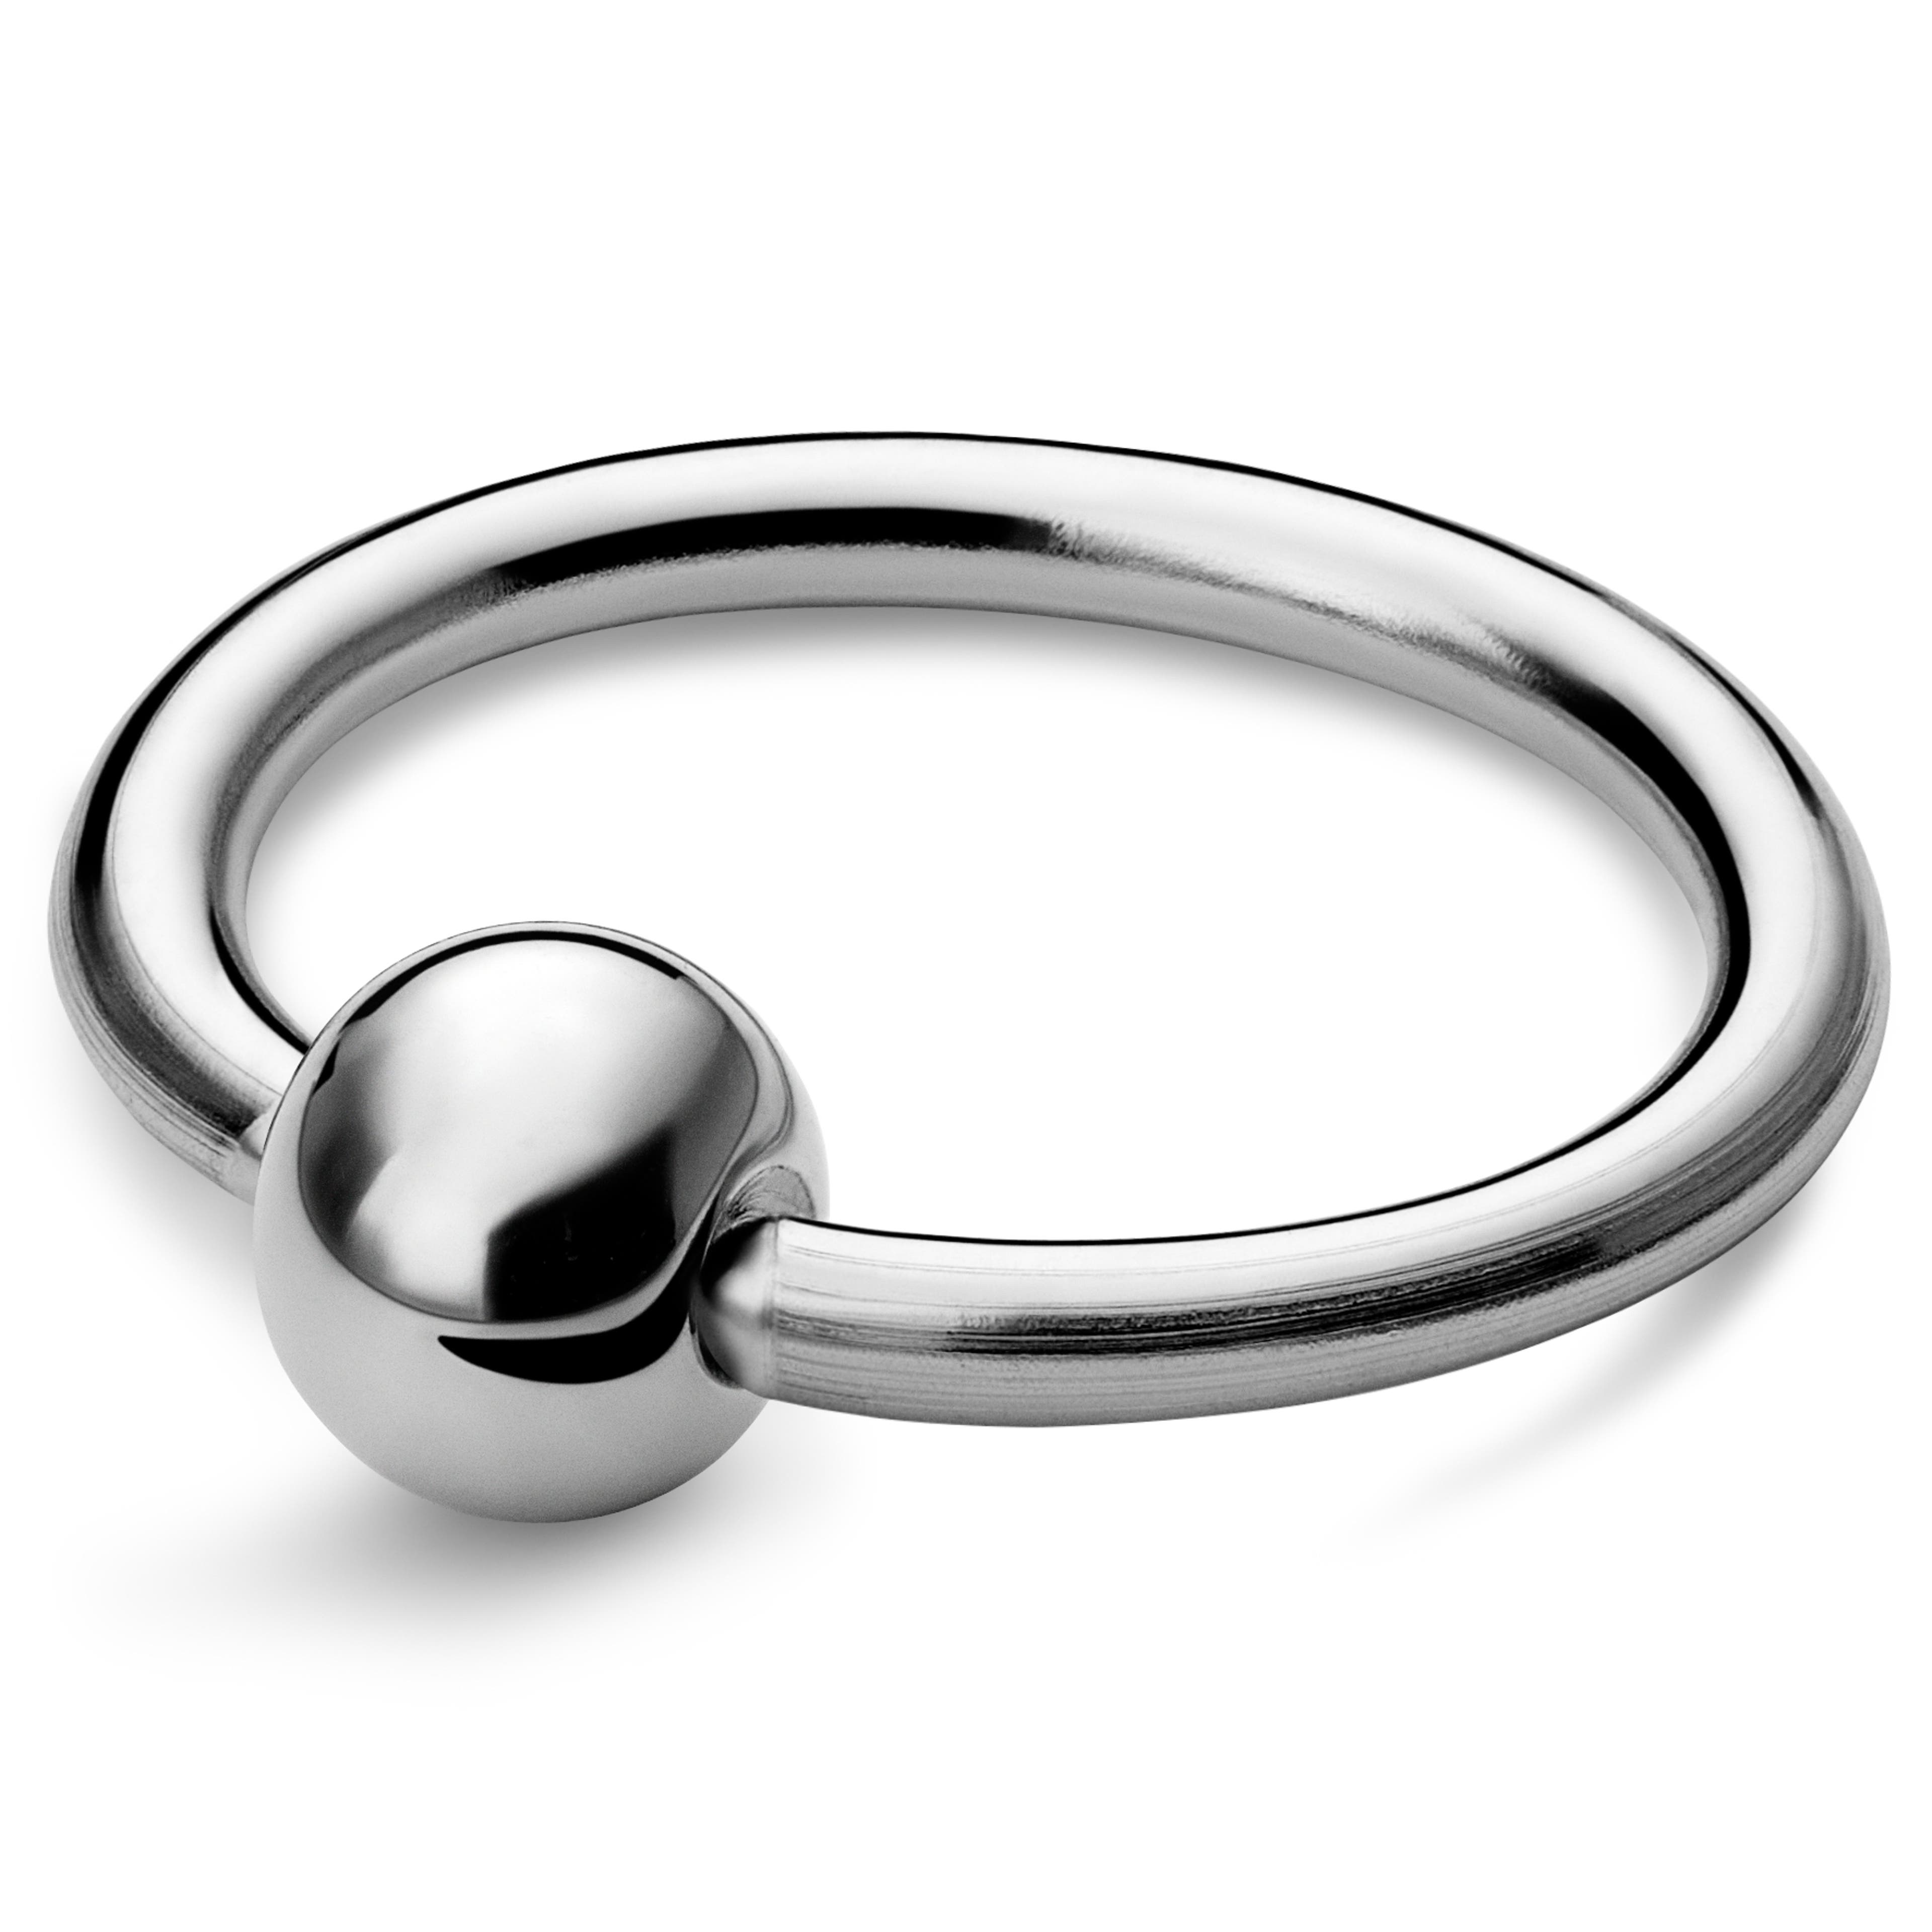 3/8" (10 mm) Silver-Tone Surgical Steel Captive Bead Ring